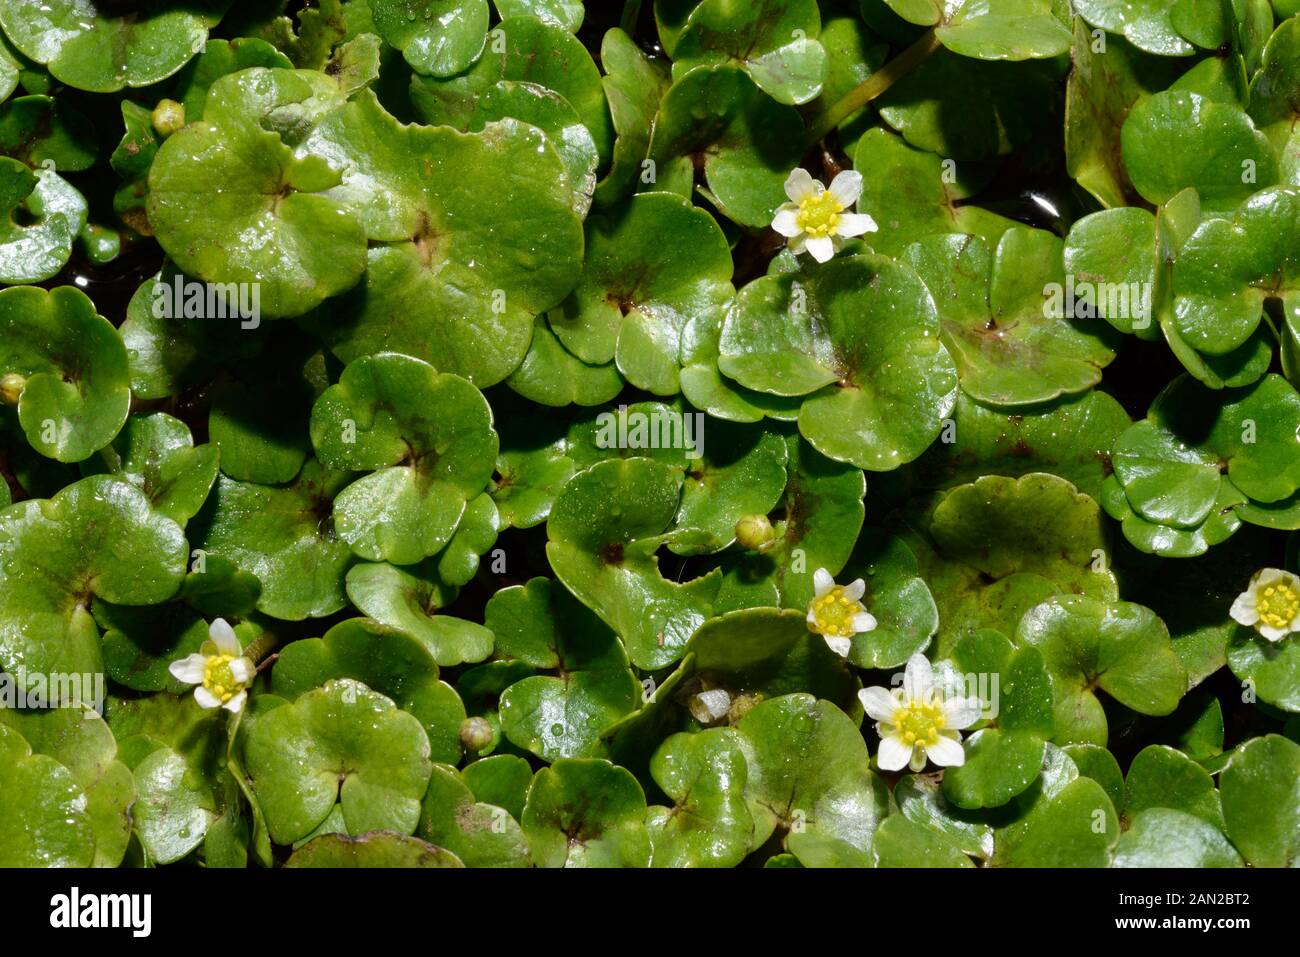 Ranunculus hederaceus (Ivy-leaved crowfoot) is native to Europe and North America growing on the edge of small water bodies. Stock Photo